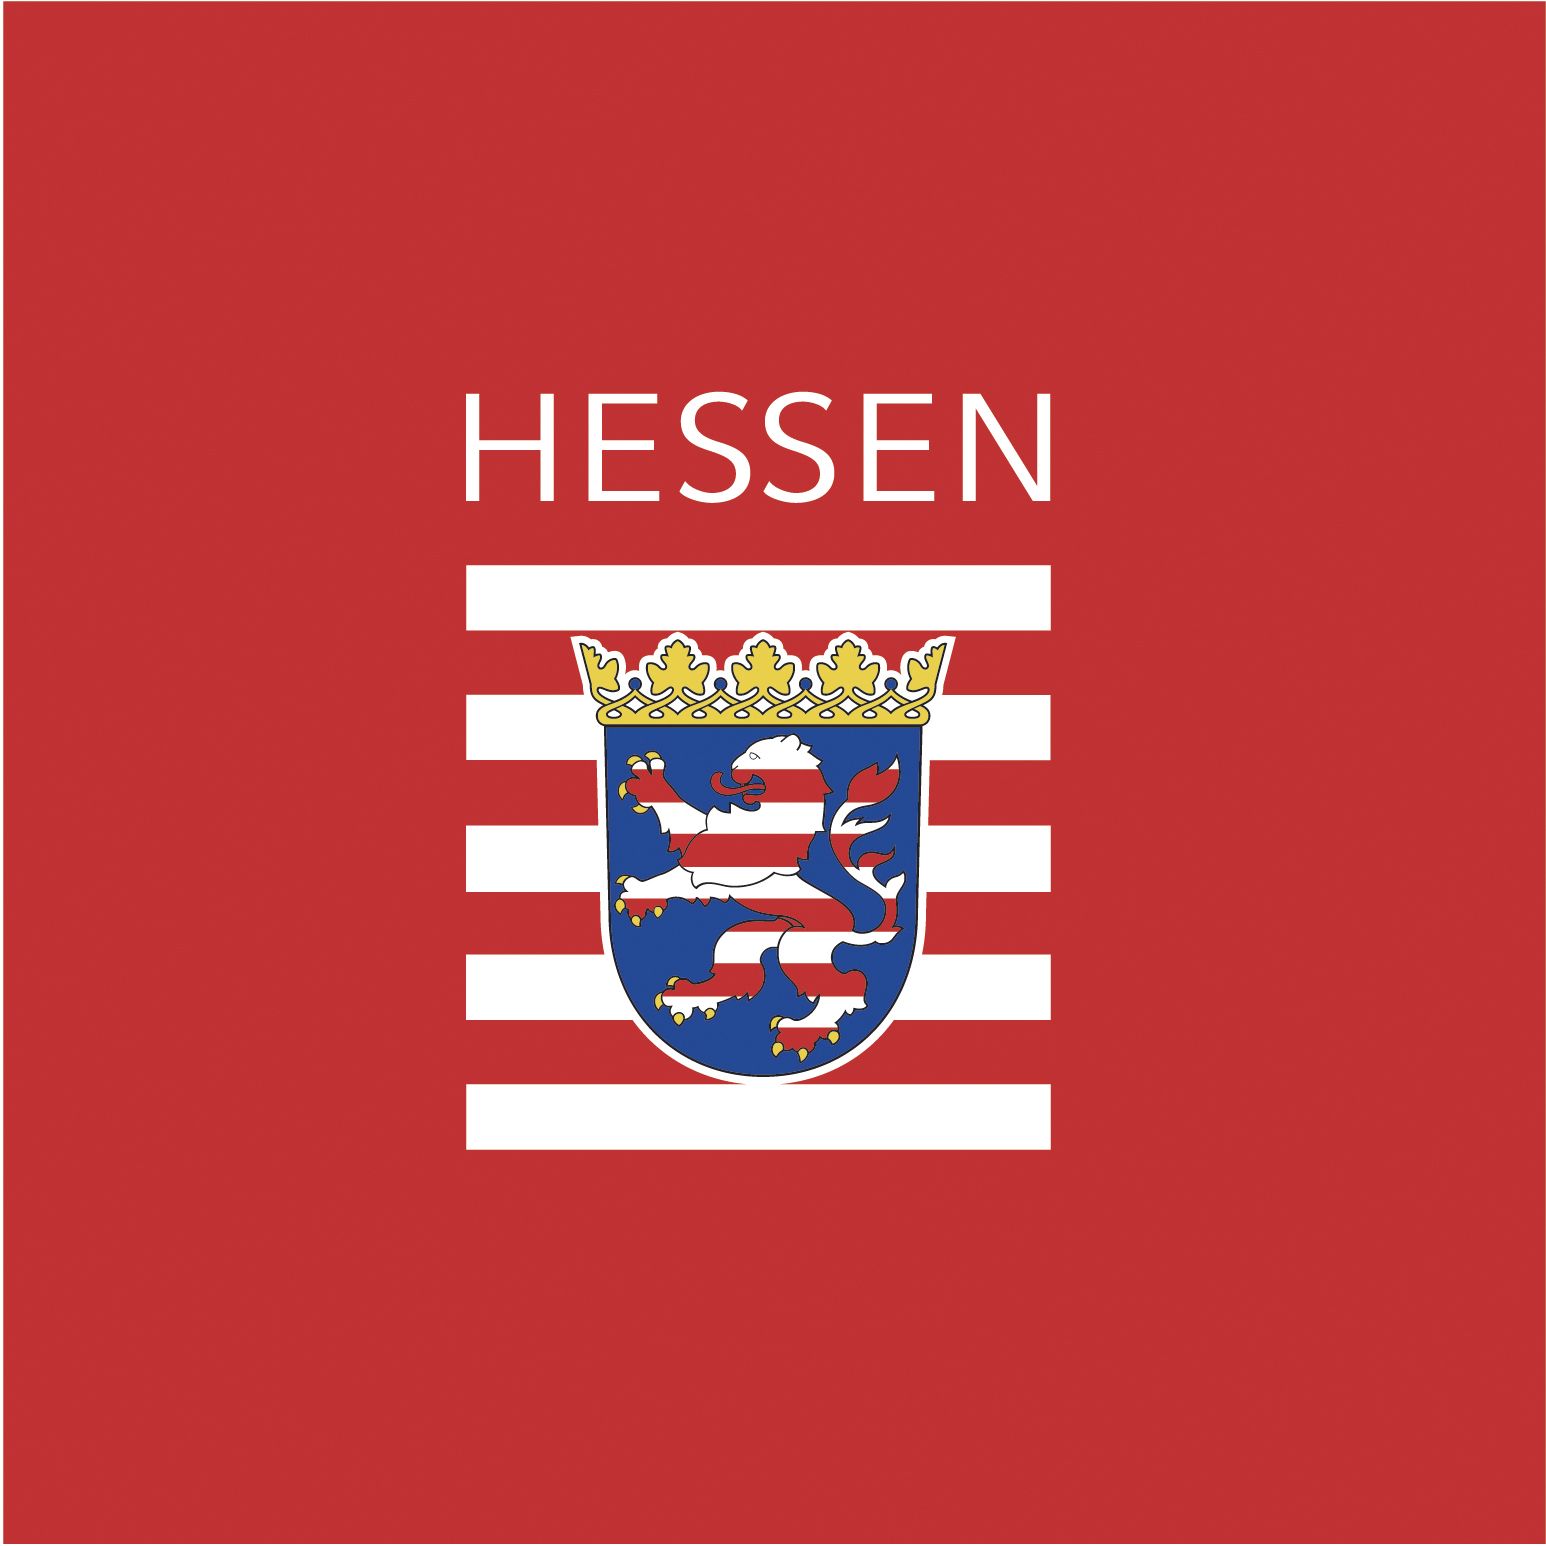 Representation of the State of Hessen to the EU